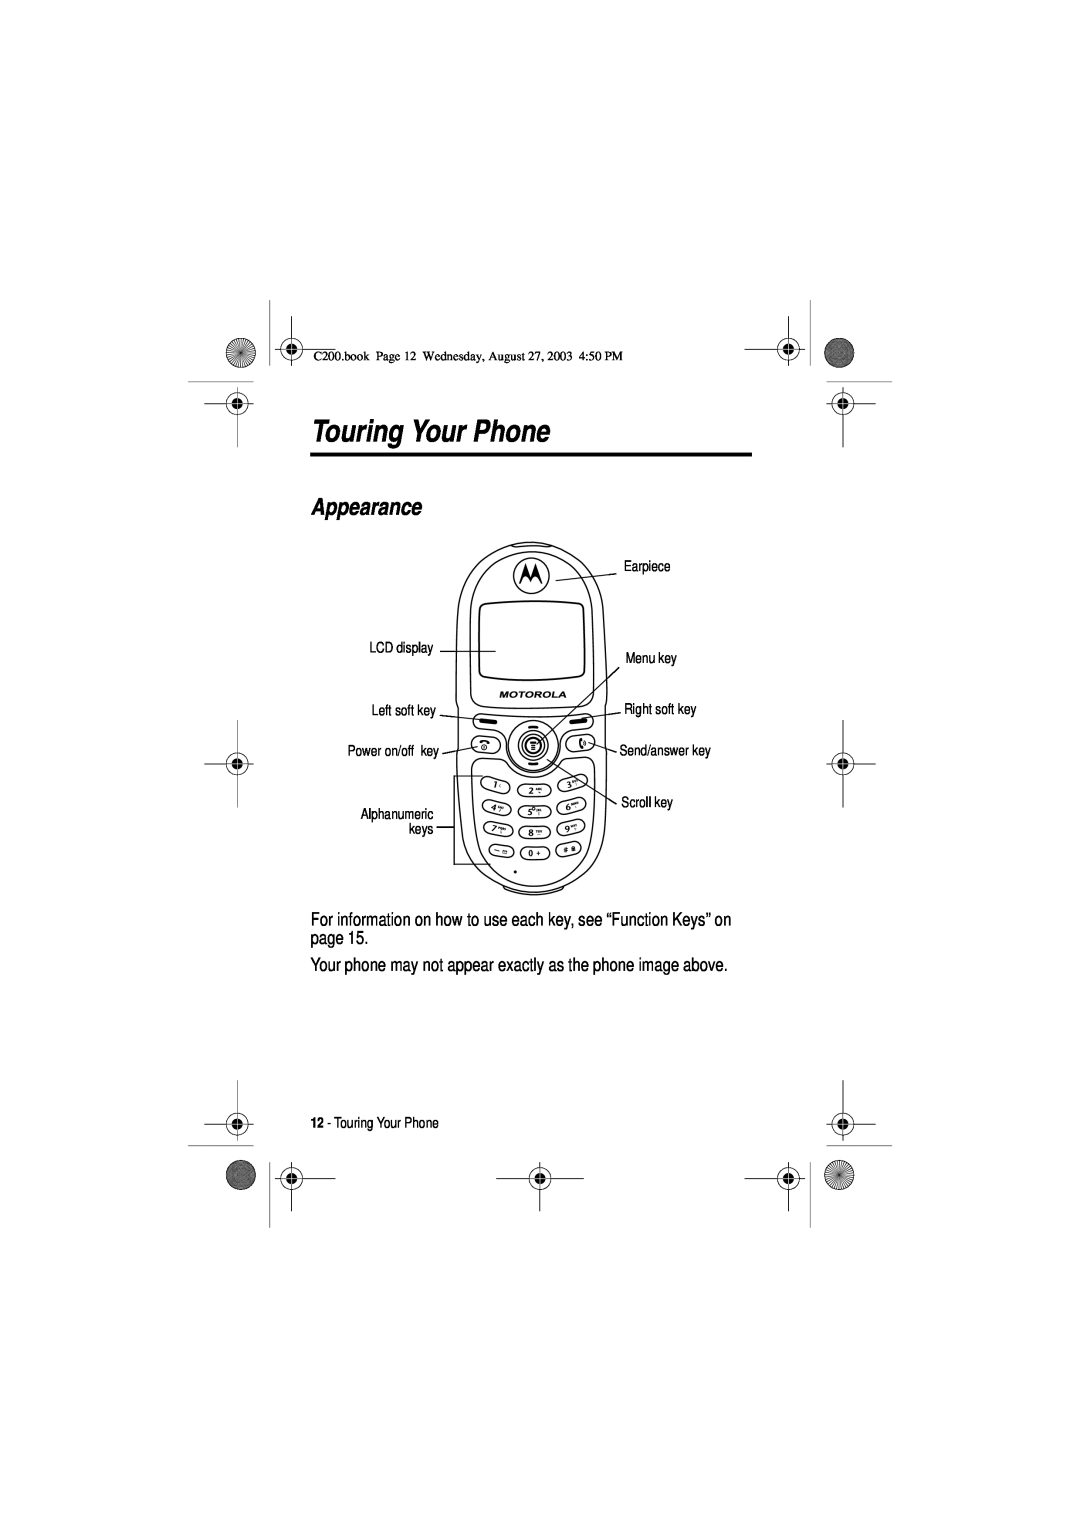 Motorola manual Touring Your Phone, Appearance, Right soft key, C200.book Page 12 Wednesday, August 27, 2003 450 PM 